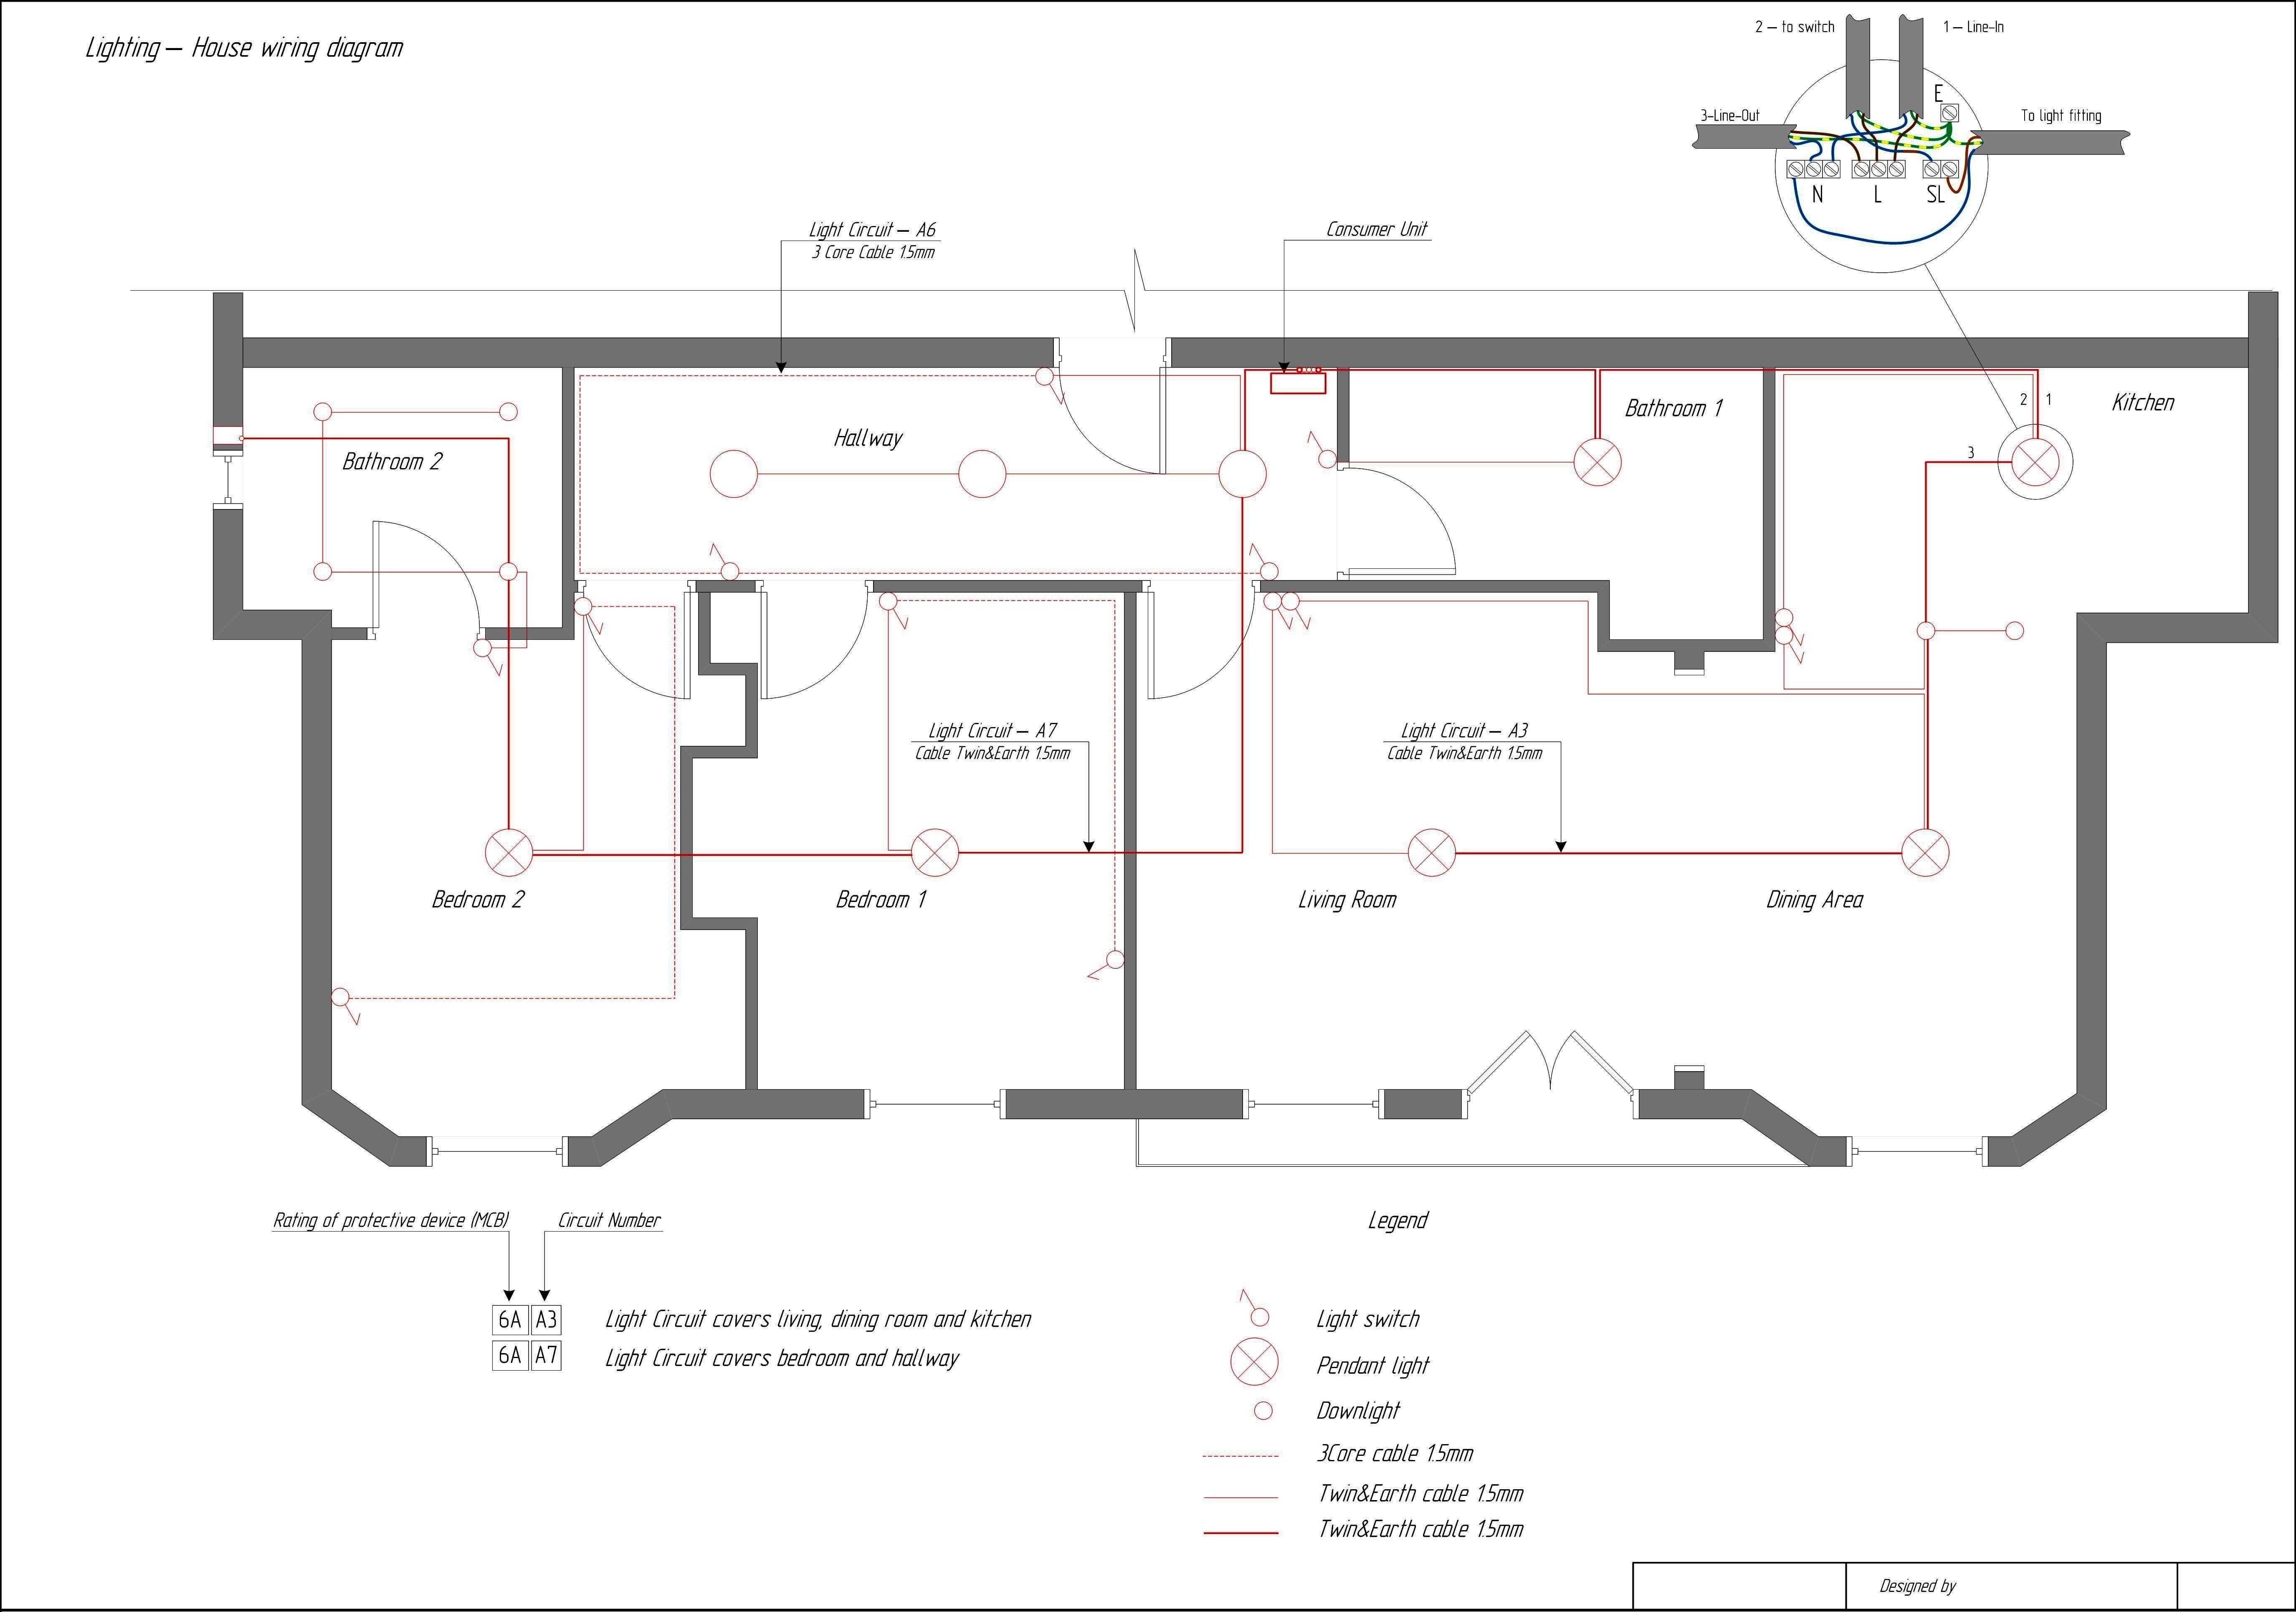 mon Wiring Diagrams Reference House Wiring Diagram Electrical Floor Plan 2004 2010 Bmw X3 E83 3